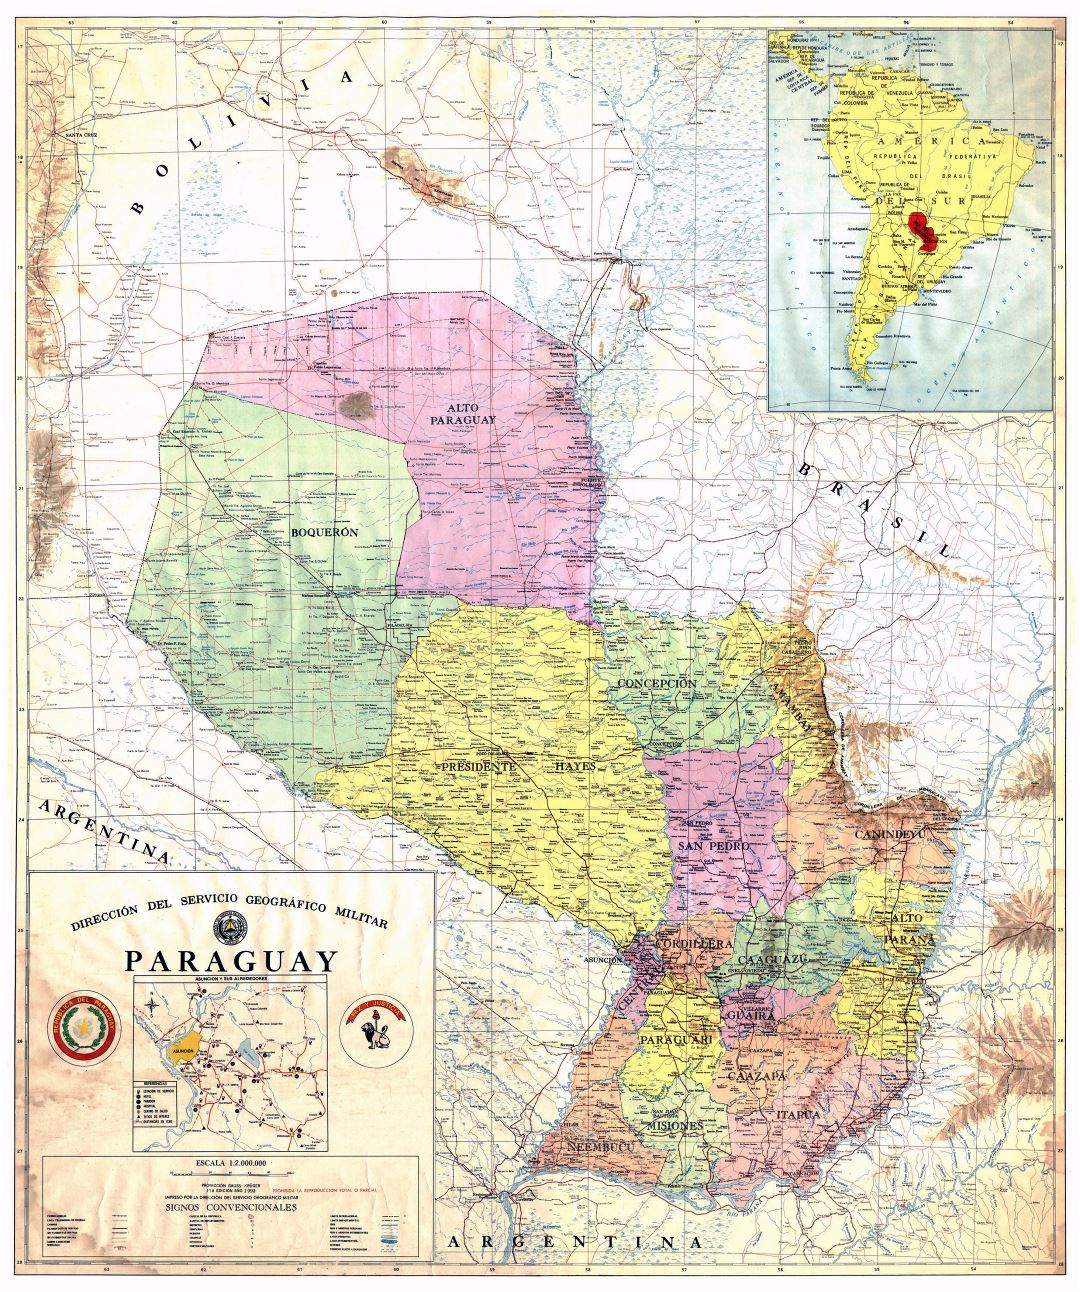 Map of Paraguay with roads and cities